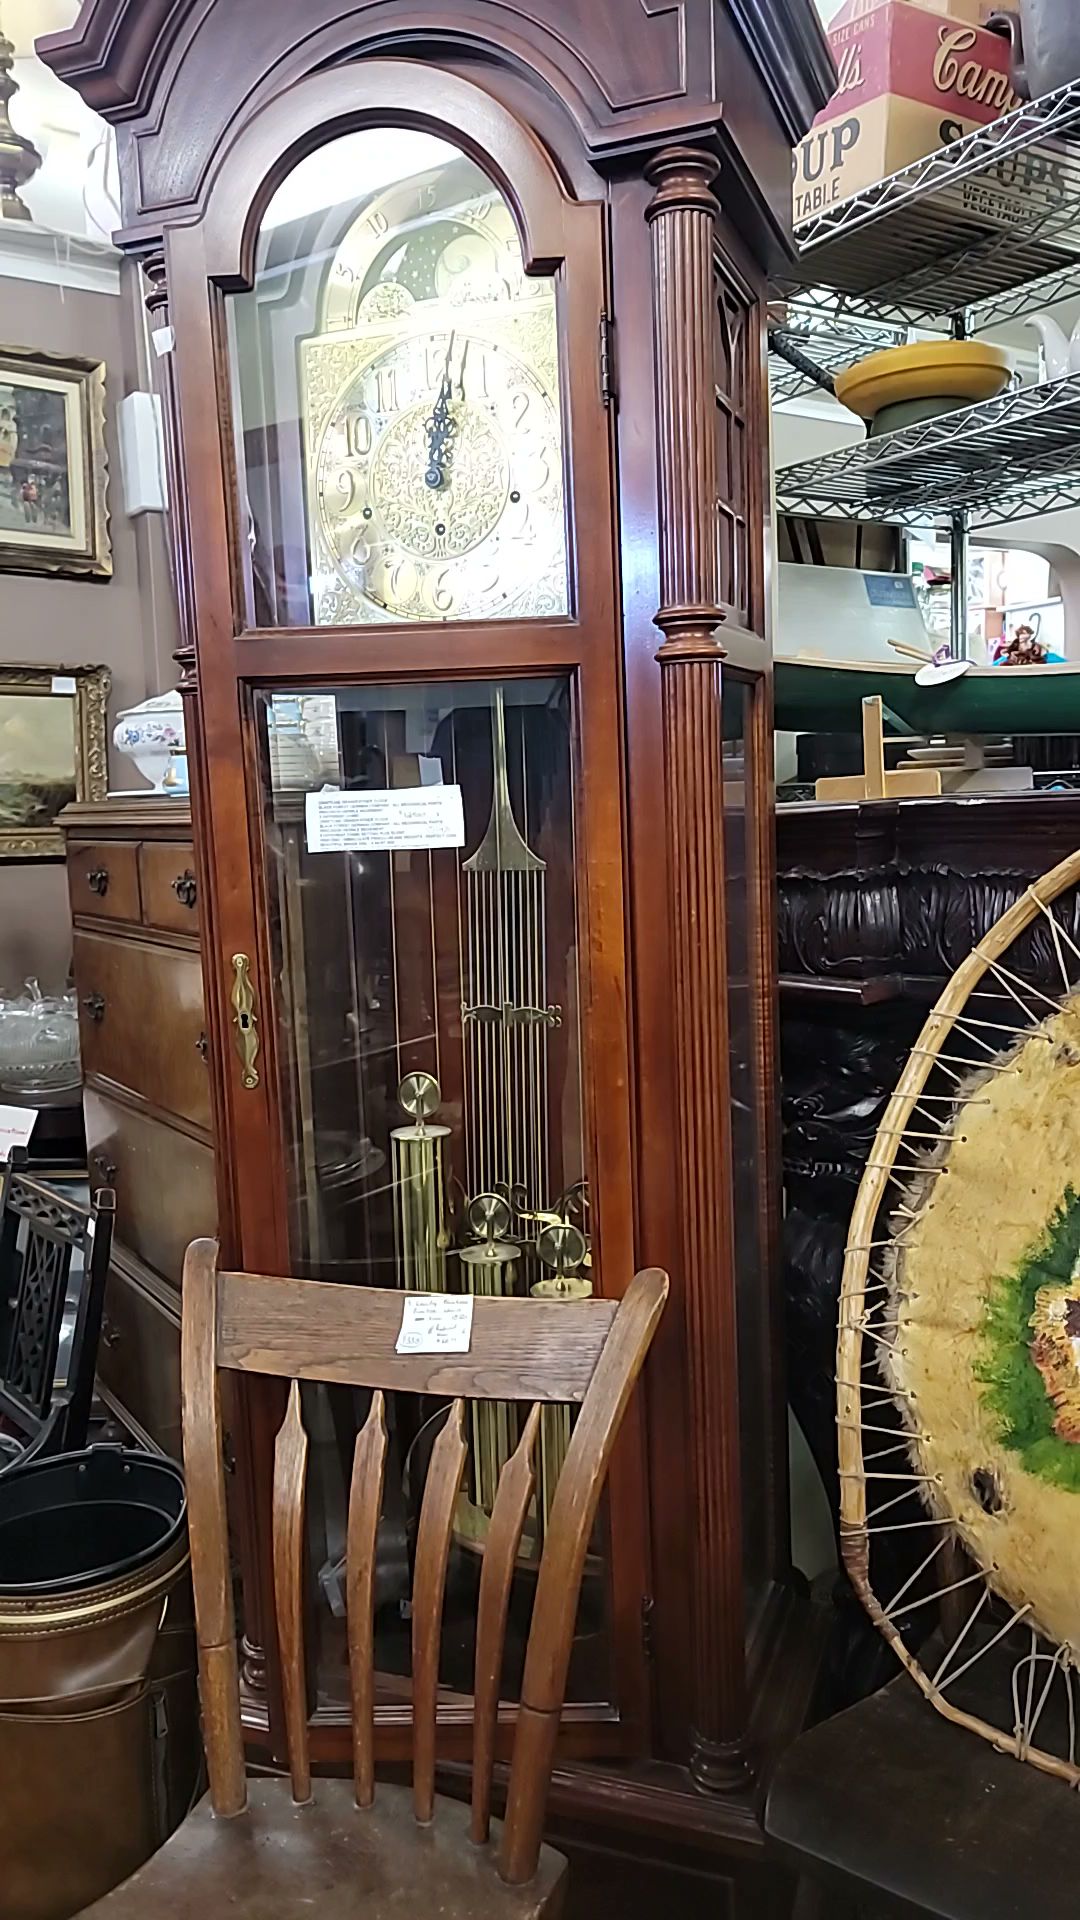 Holland Consignment Shoppe & Auction House